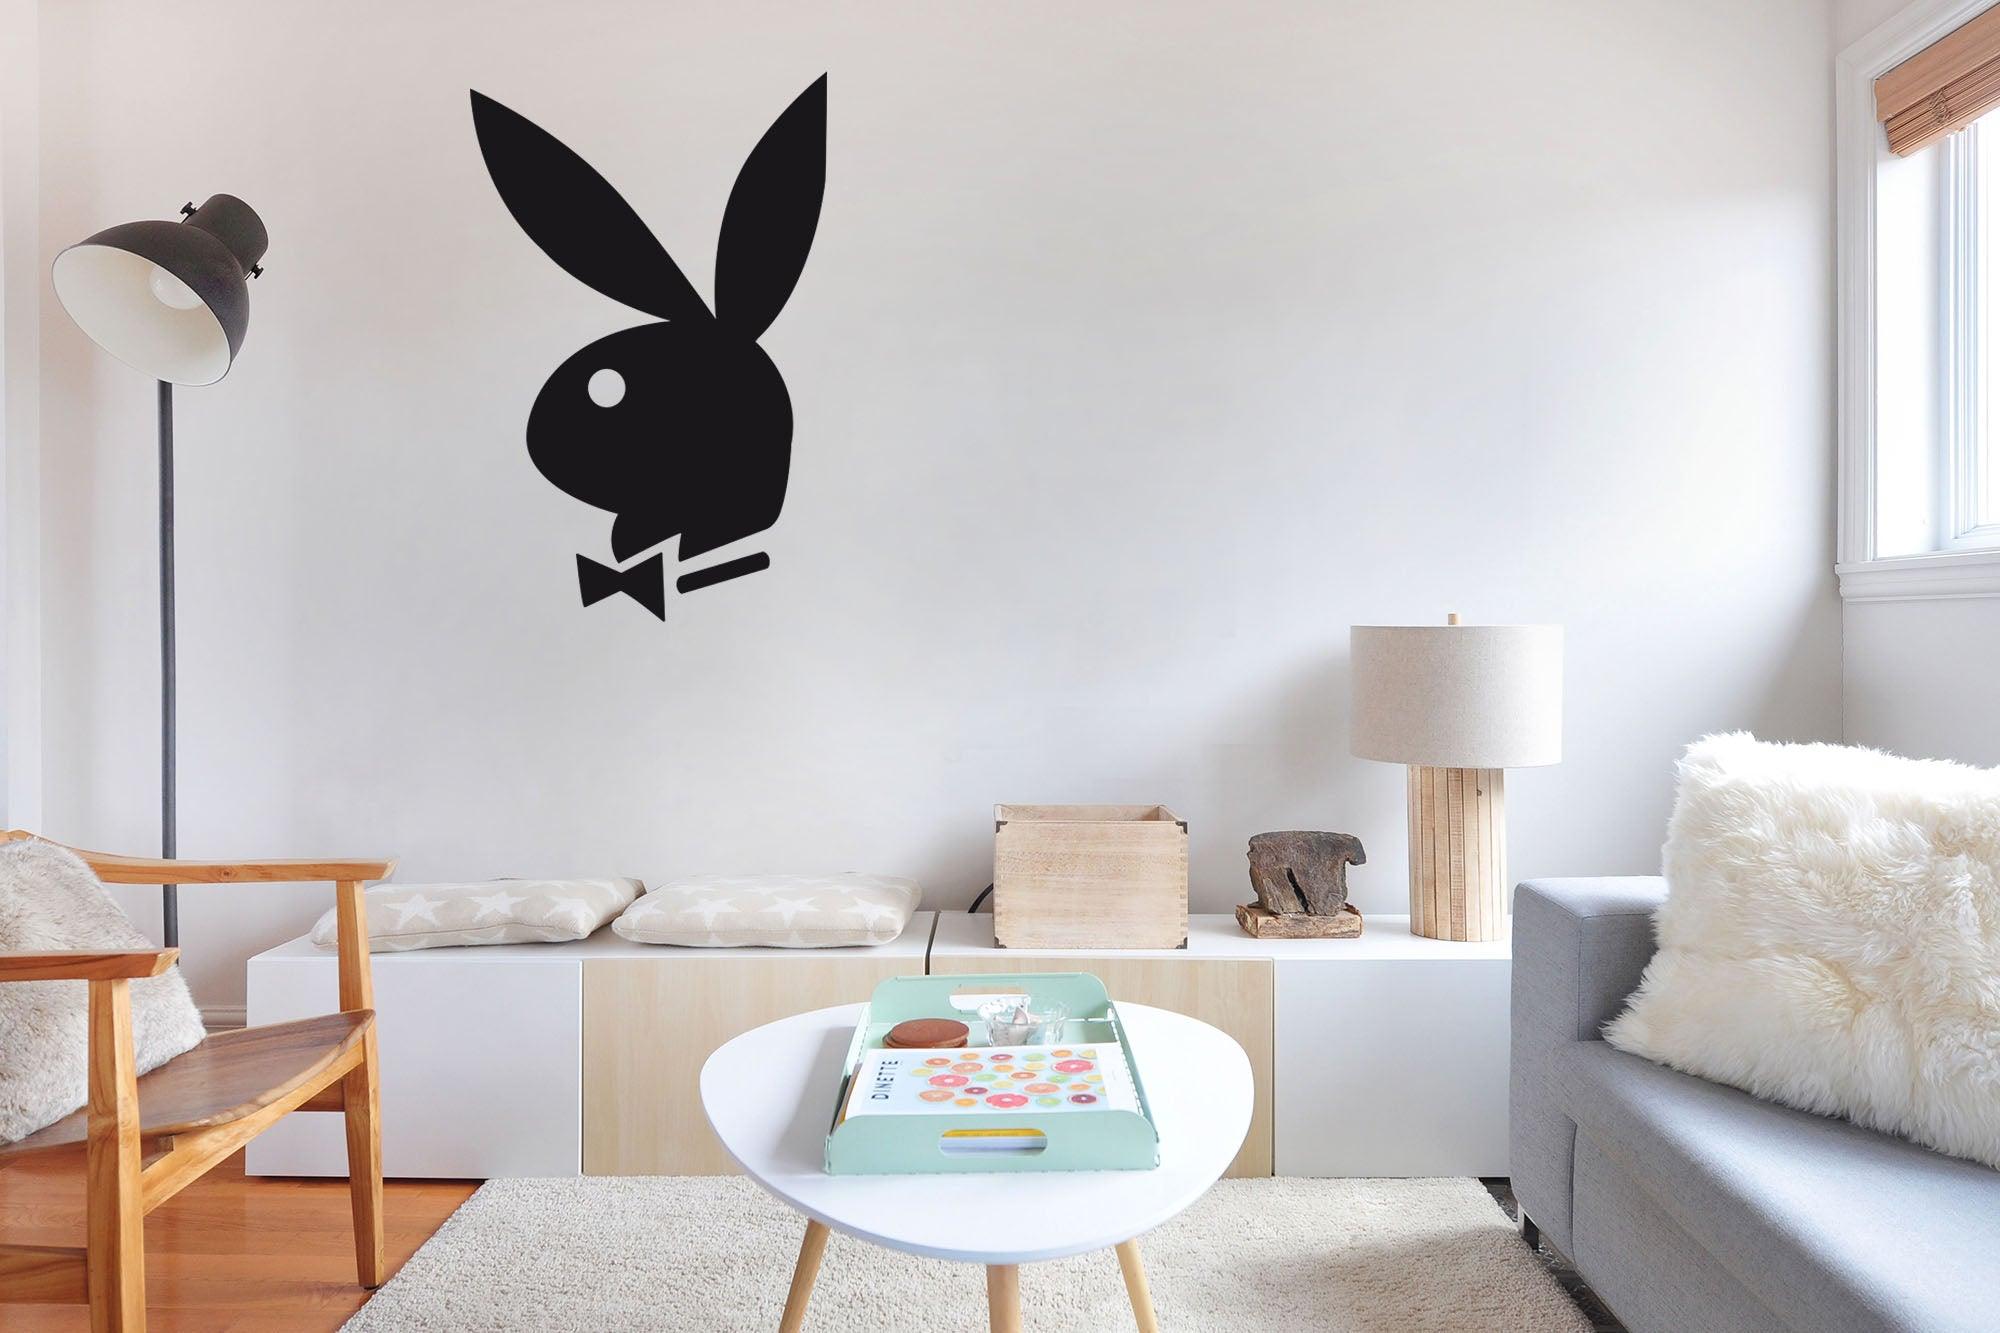 CoolWalls.ca sticker Playboy Black Wall Sticker: Peel-N-Stick, Wall Decal, Zero Wall Damage removal